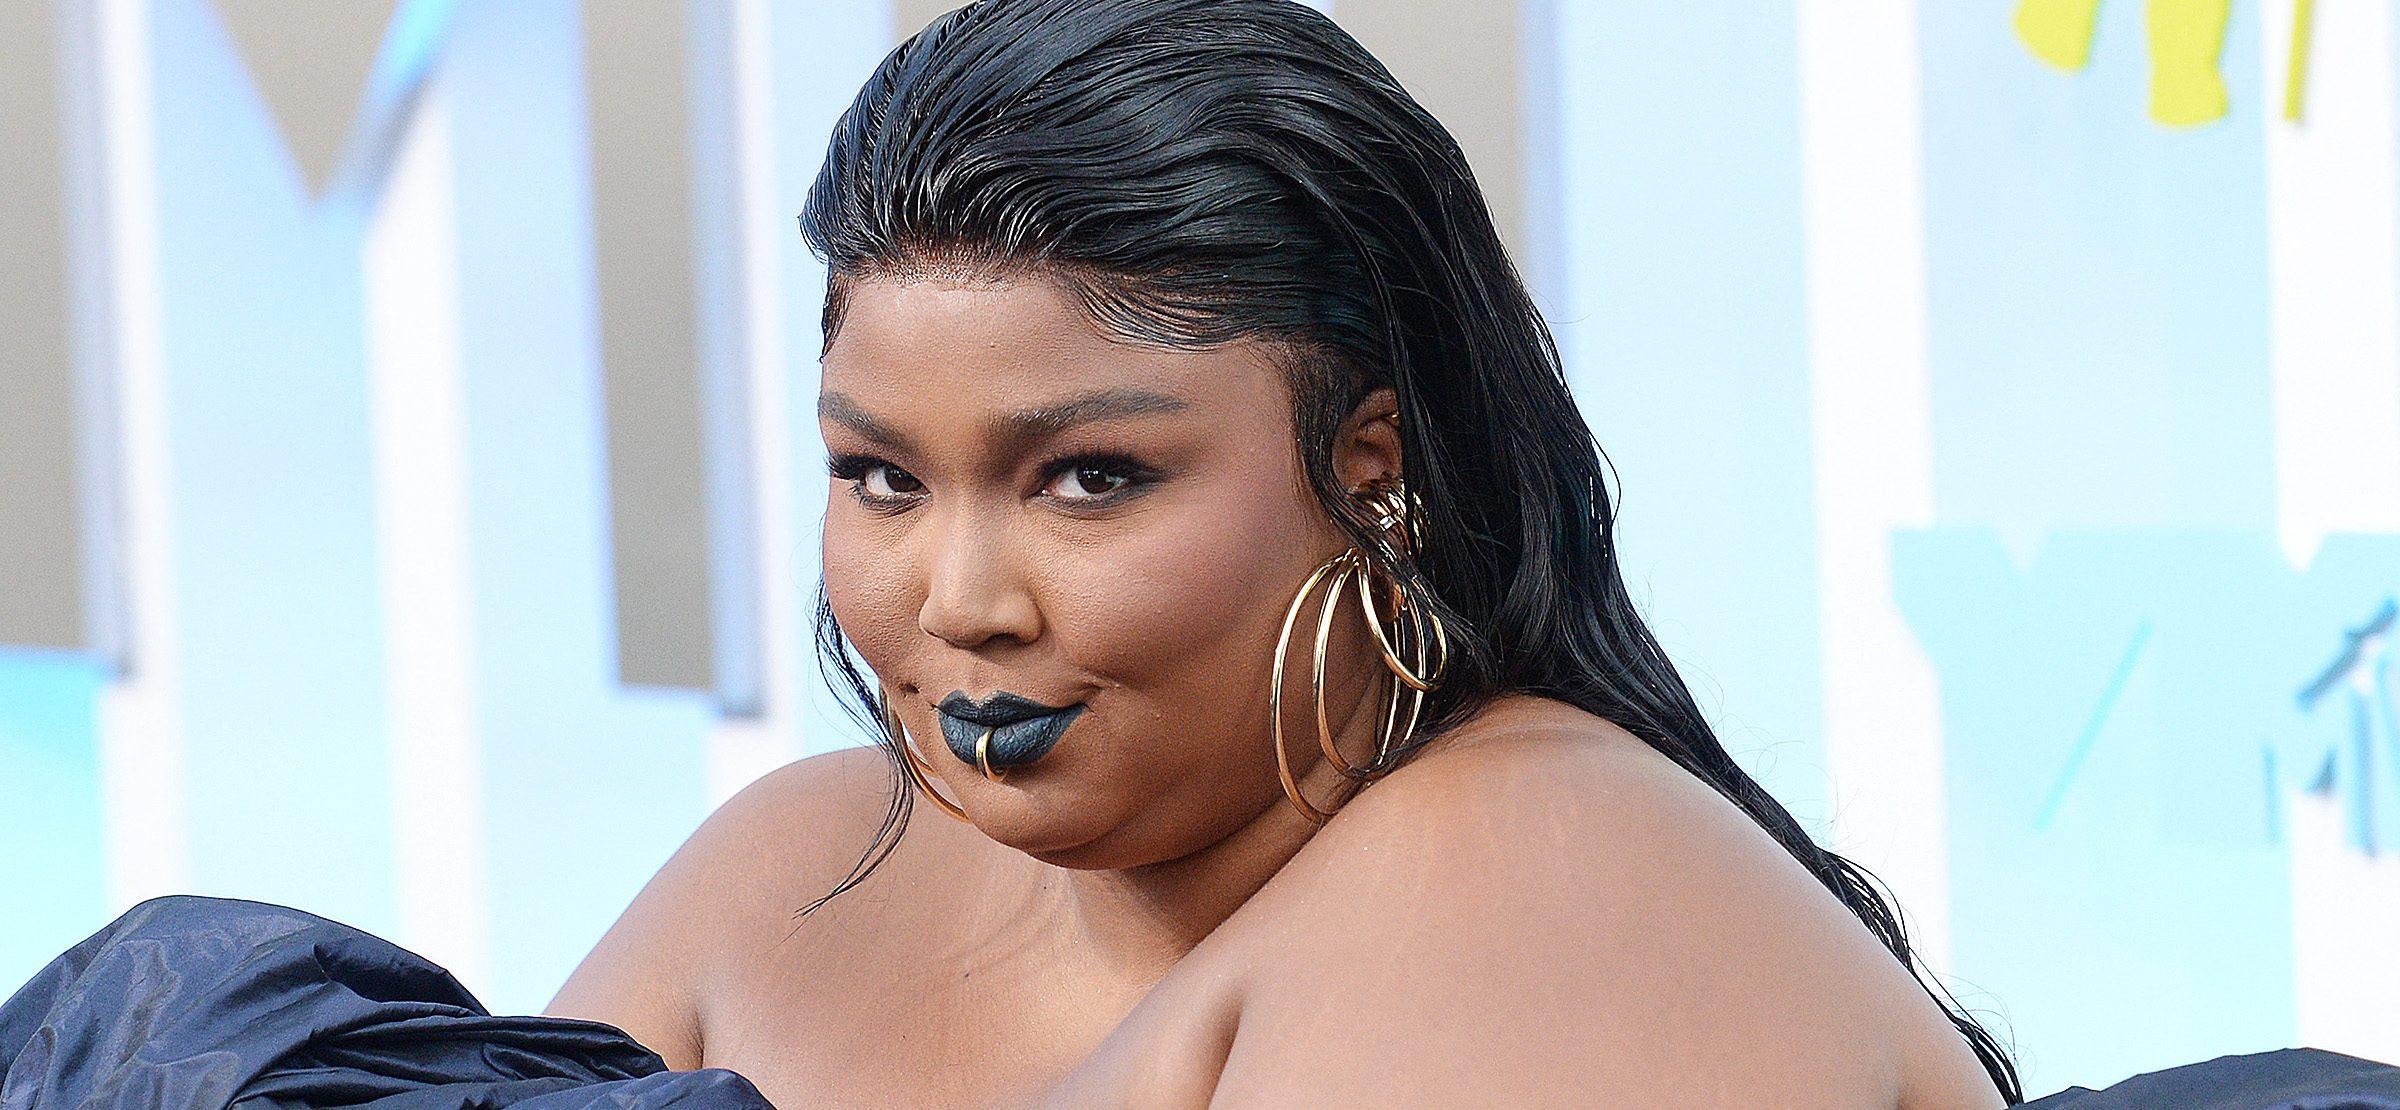 Lizzo Debuts Striking Layered Bob Hairdo & Octopus-inspired Style Amid Legal Trouble